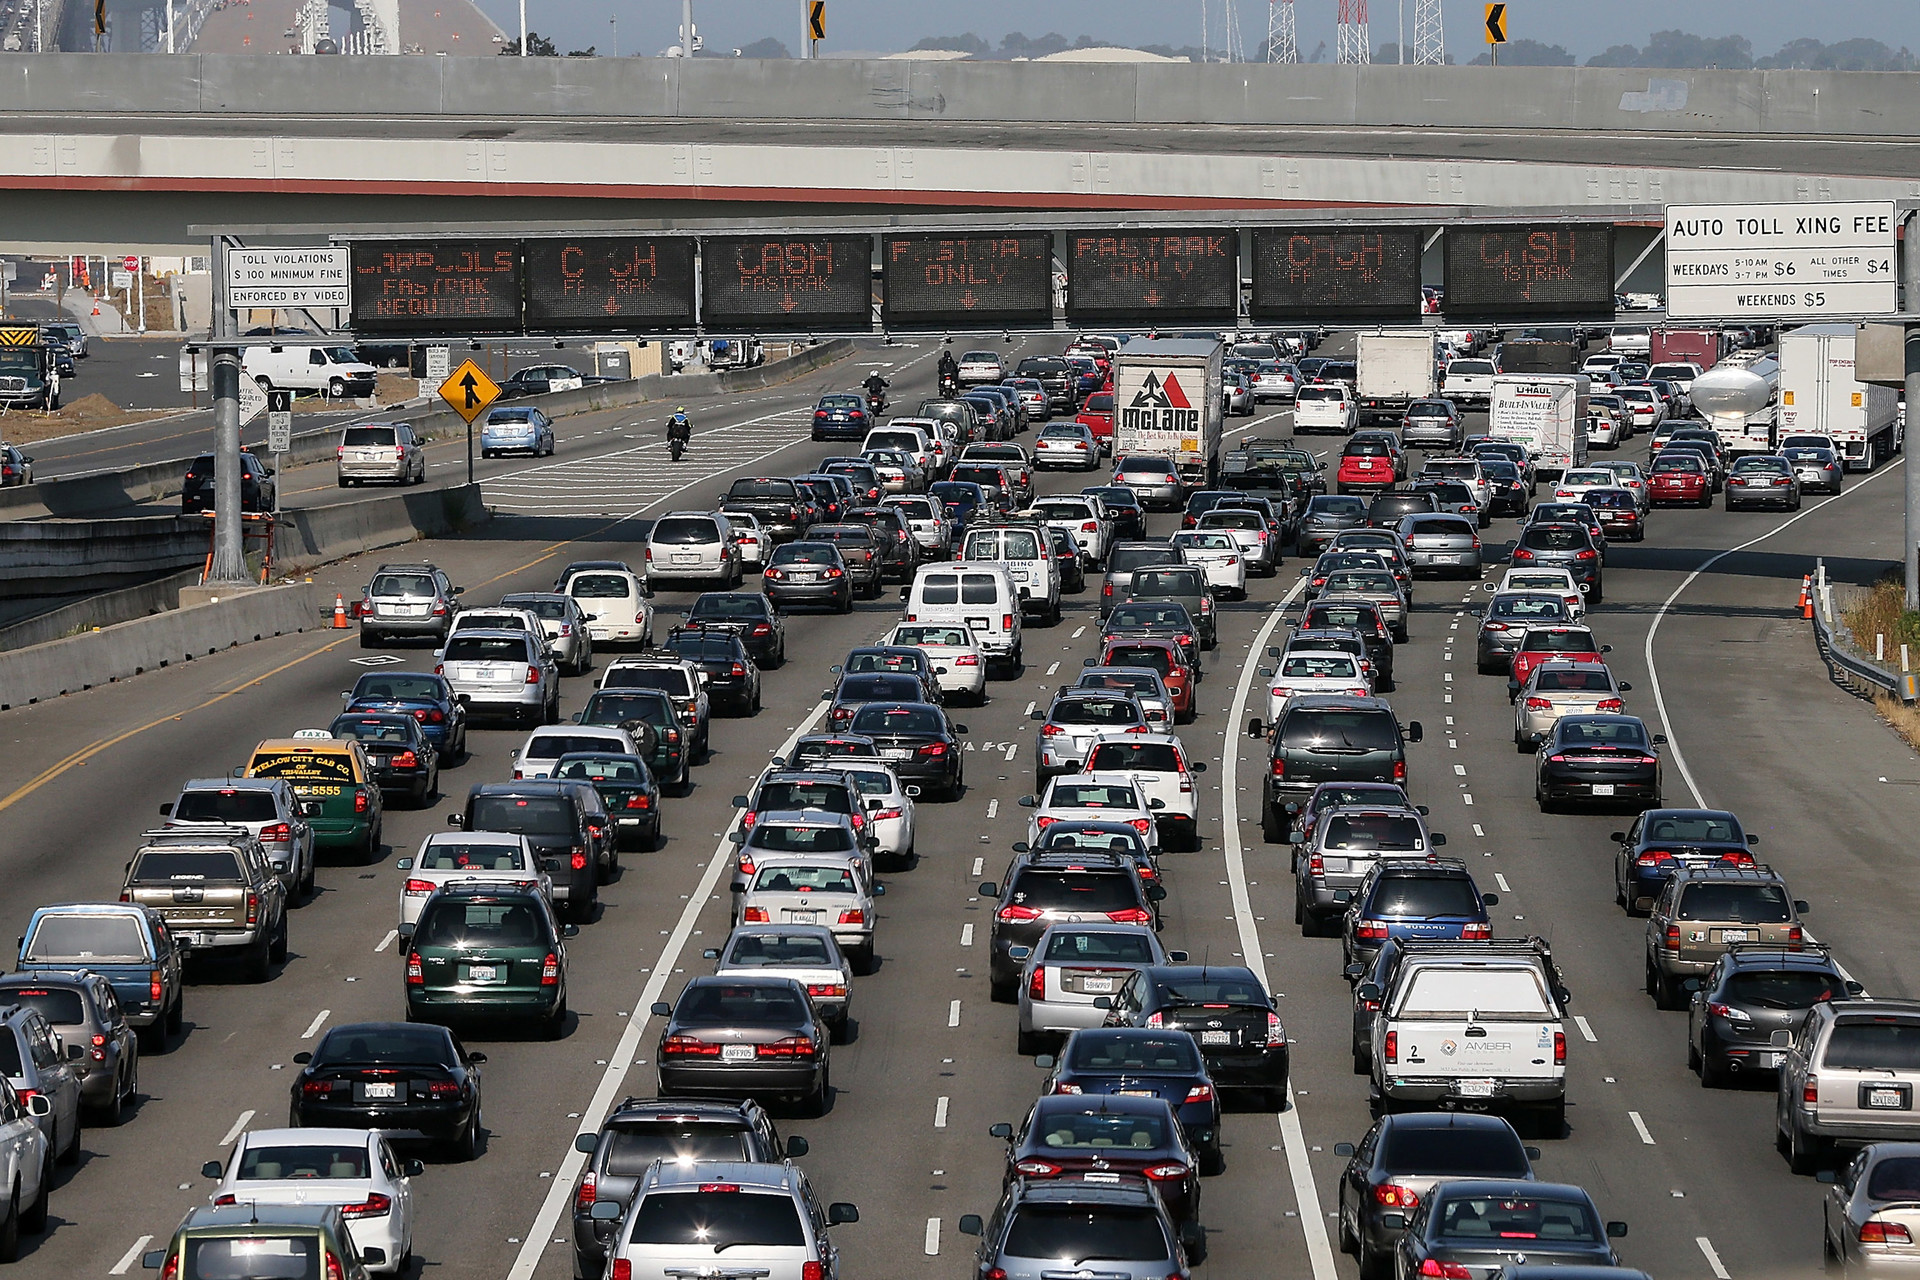 Commuter traffic backs up at the toll plaza to the San Francisco-Oakland Bay Bridge.